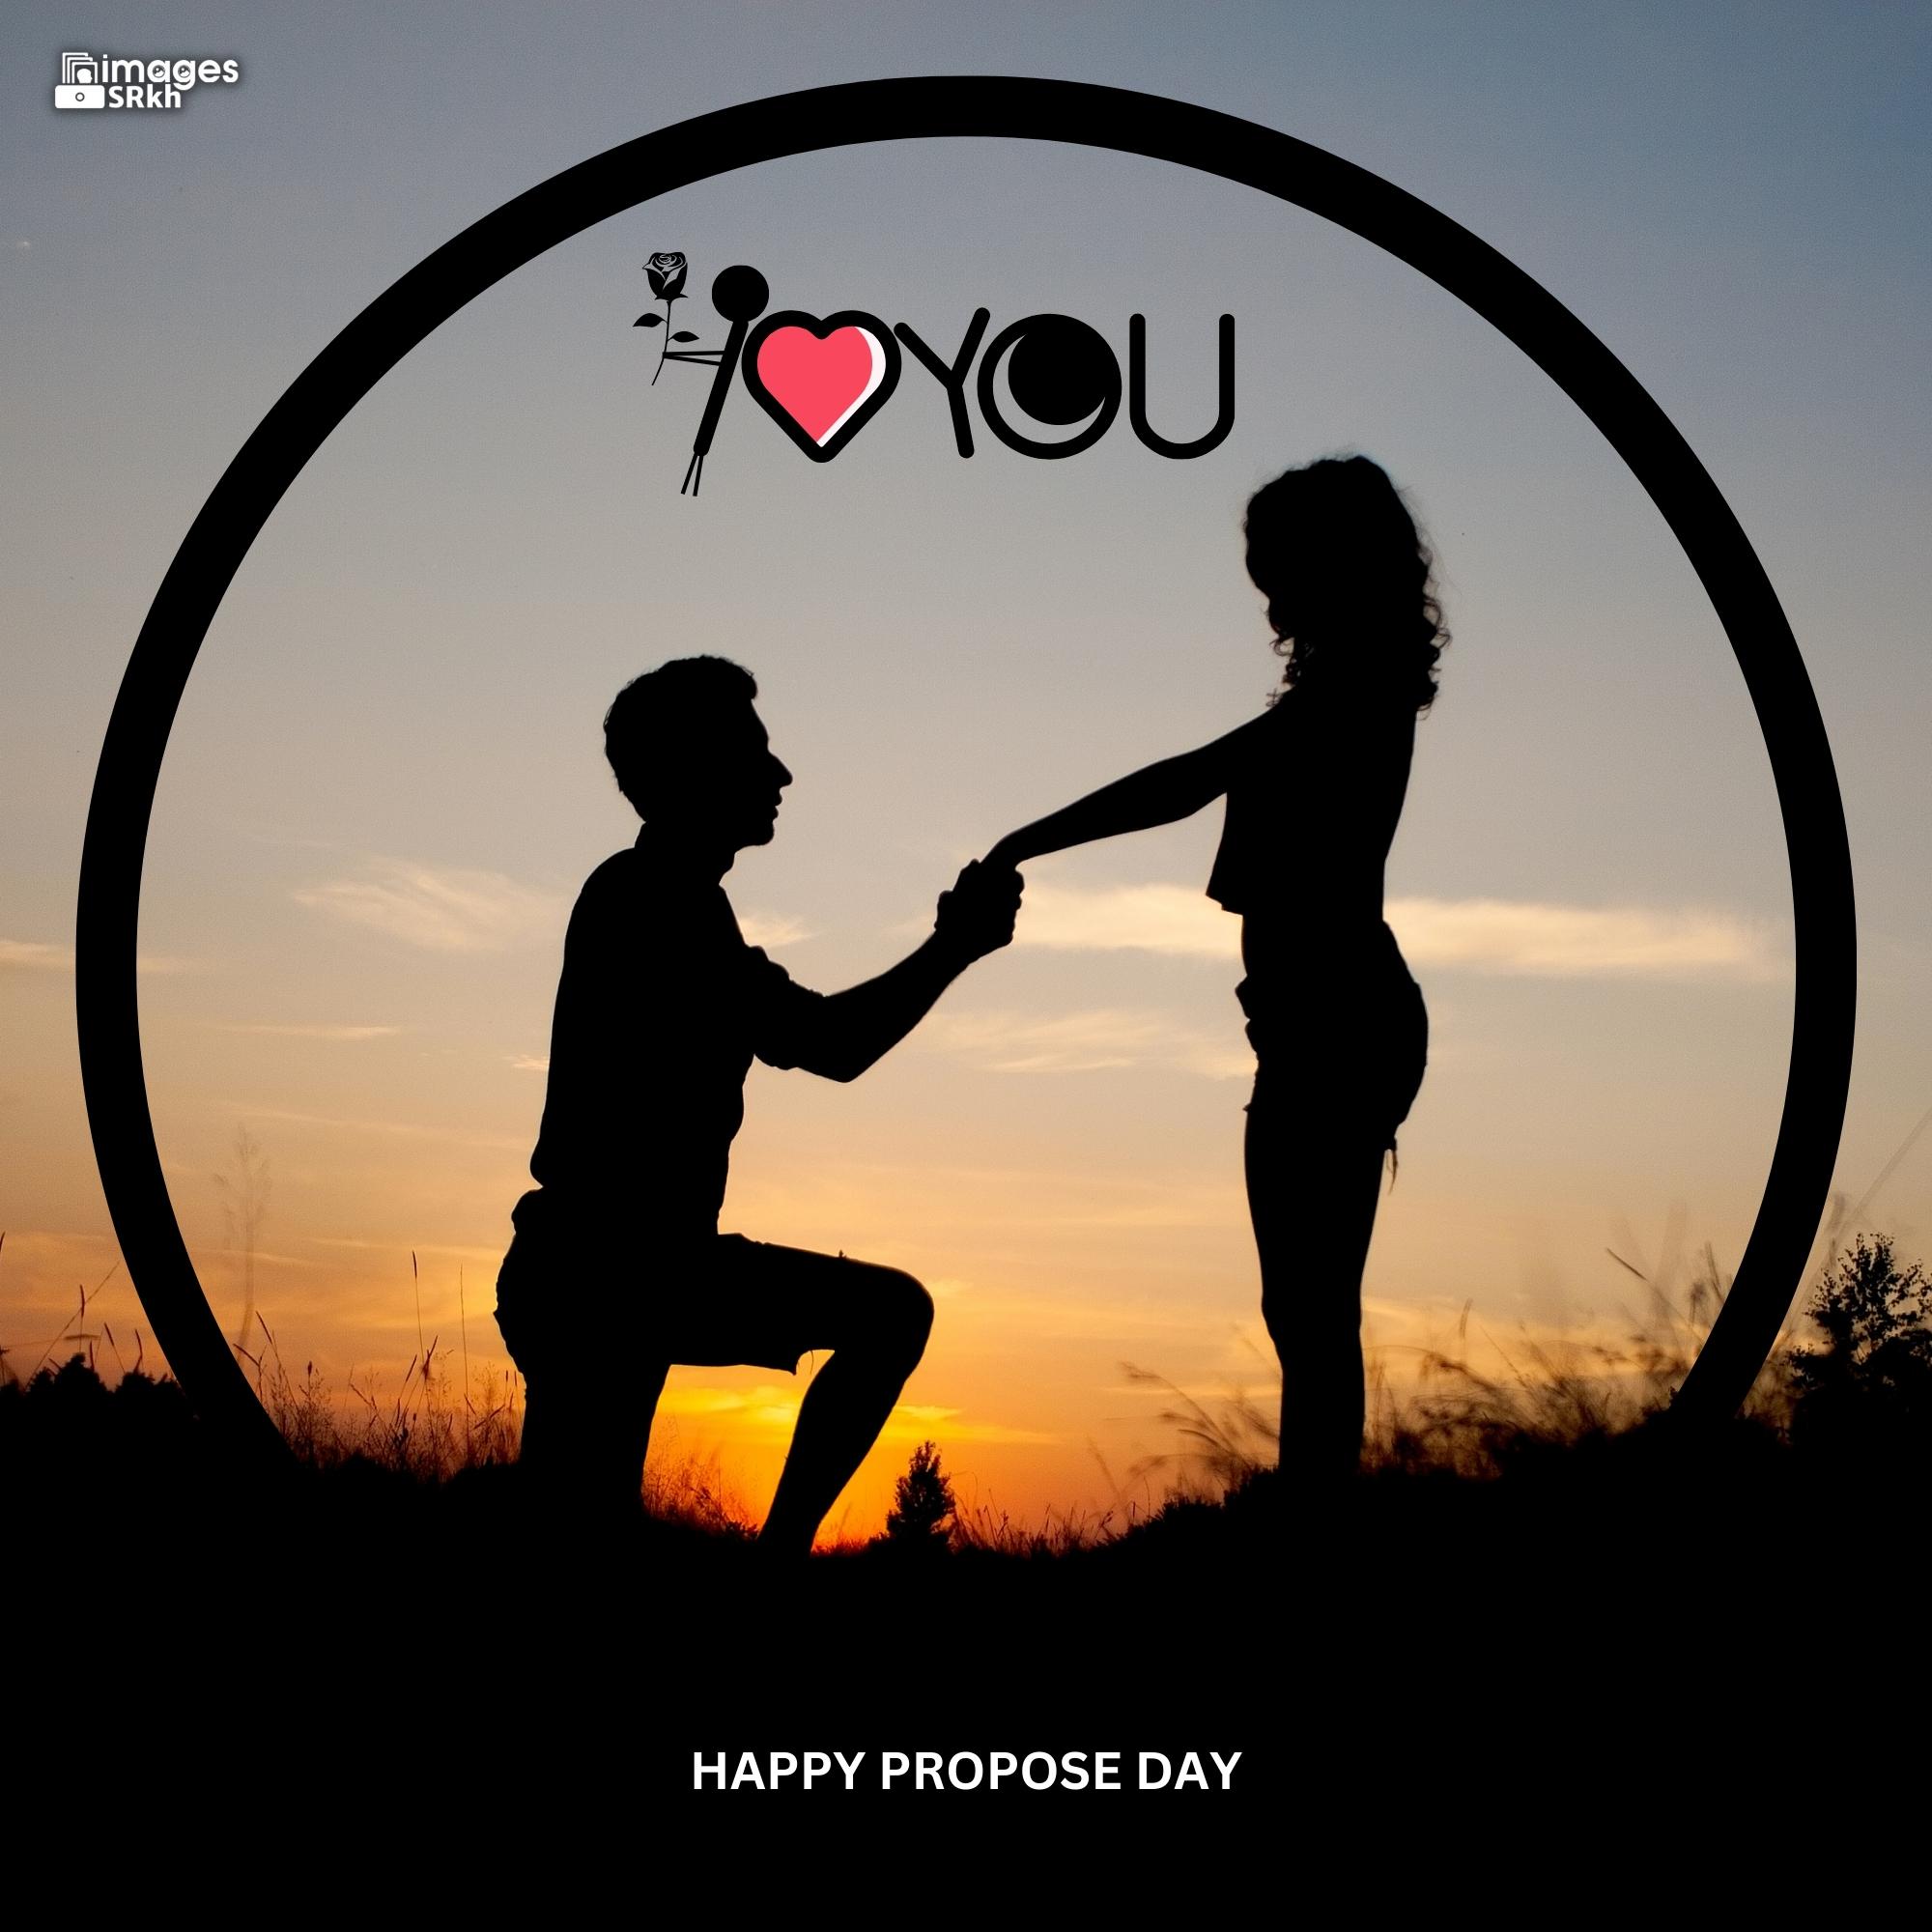 Happy Propose Day Images | 396 | I LOVE YOU